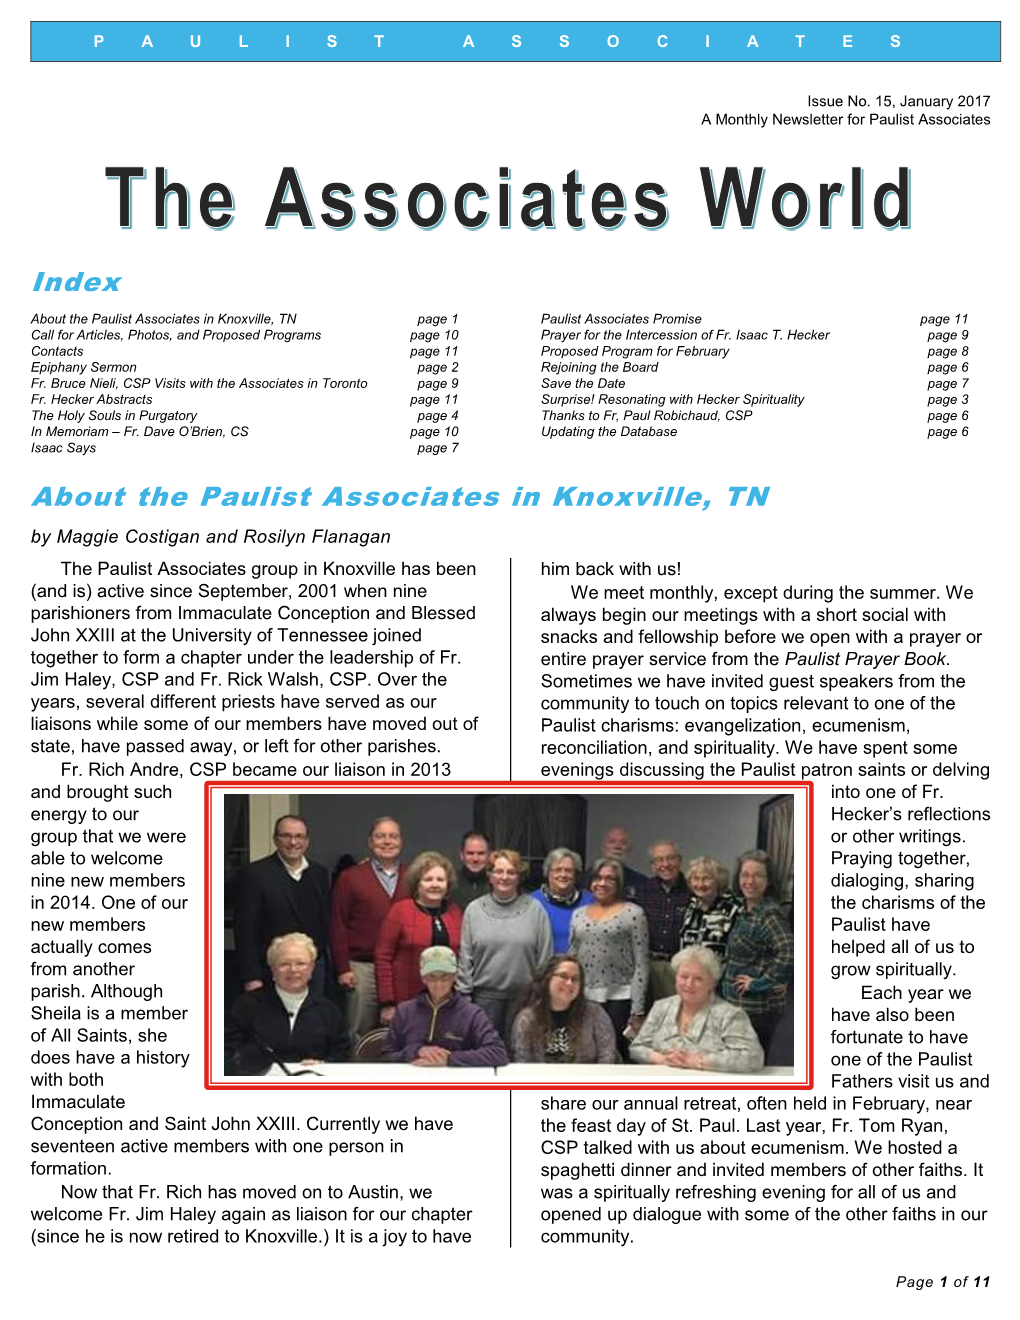 About the Paulist Associates in Knoxville, TN